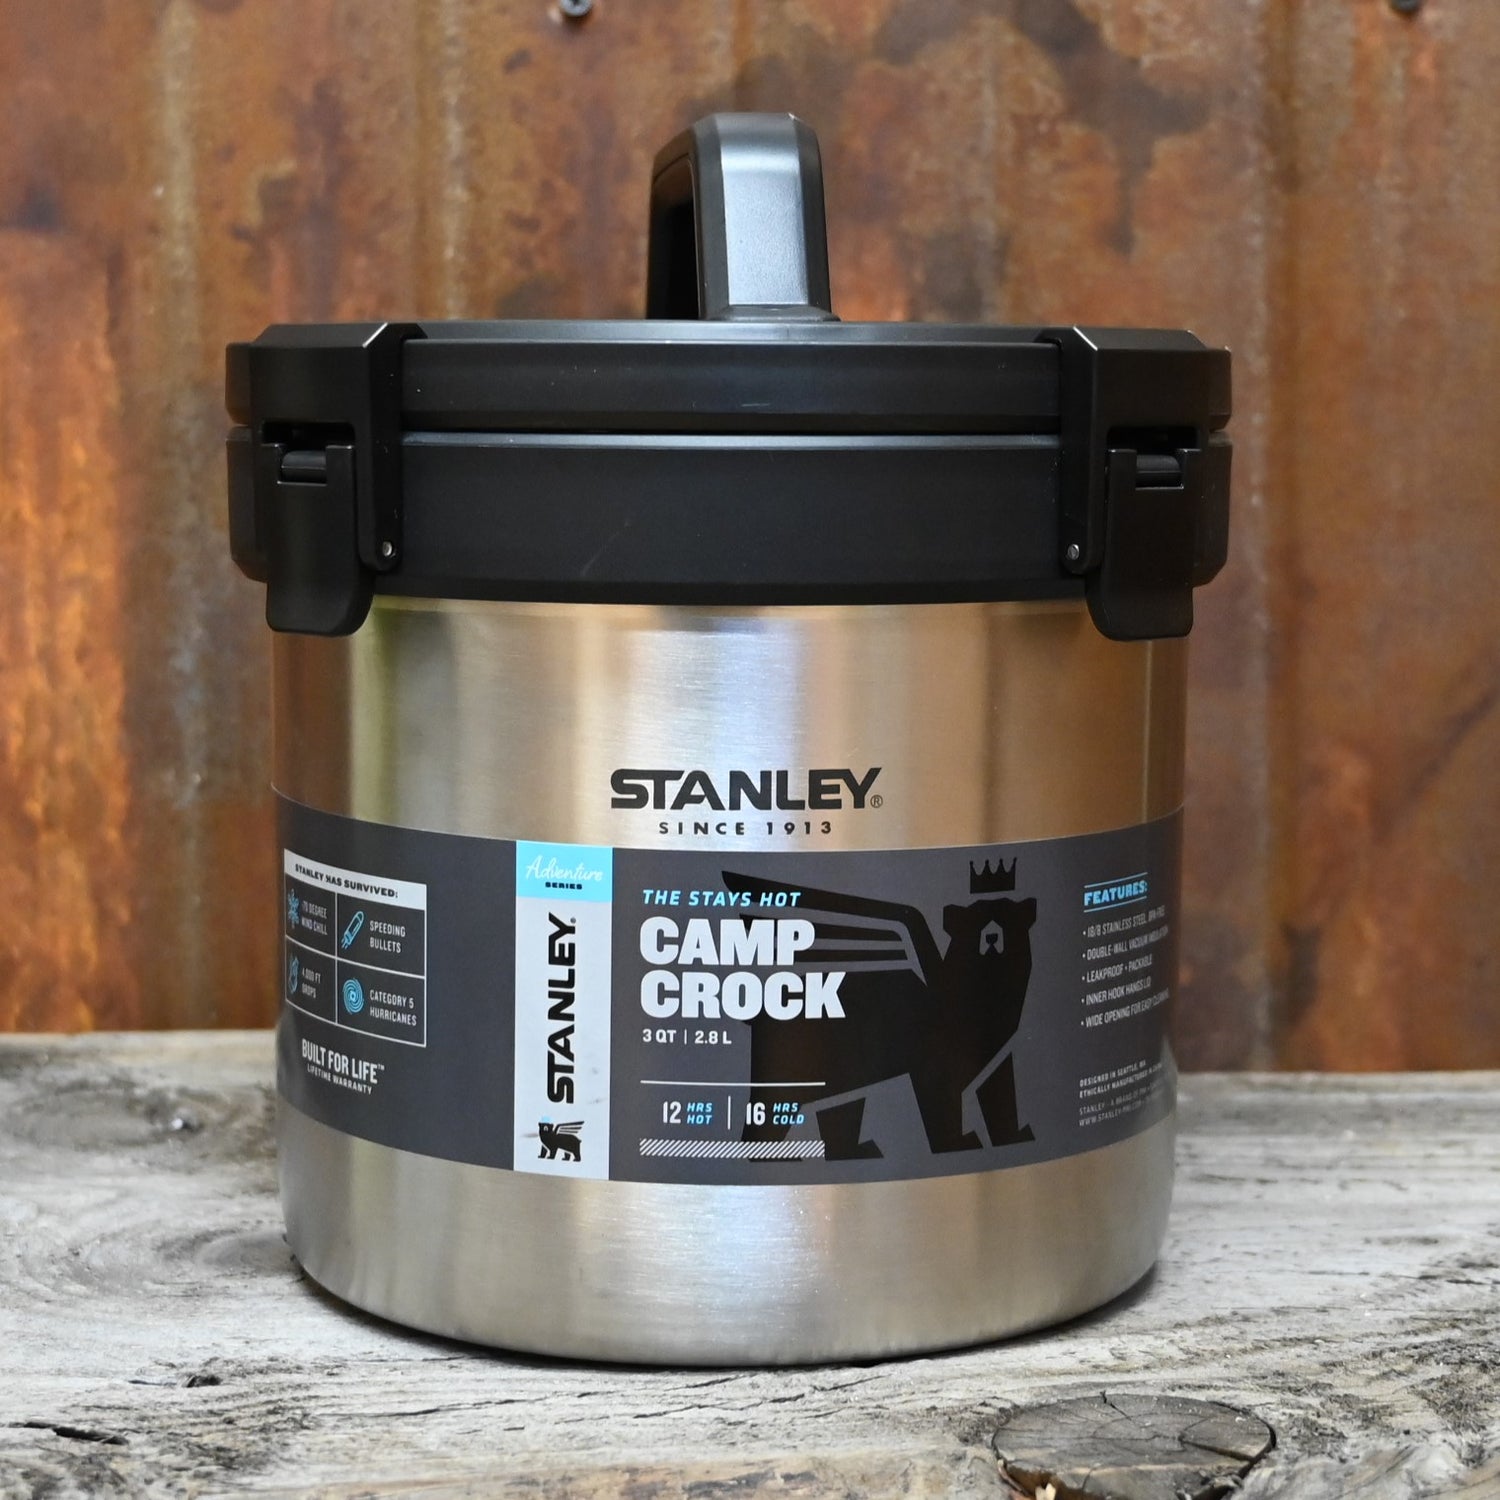 Stanley Stay-Hot Camp Crock in Stainless Steel view of crock